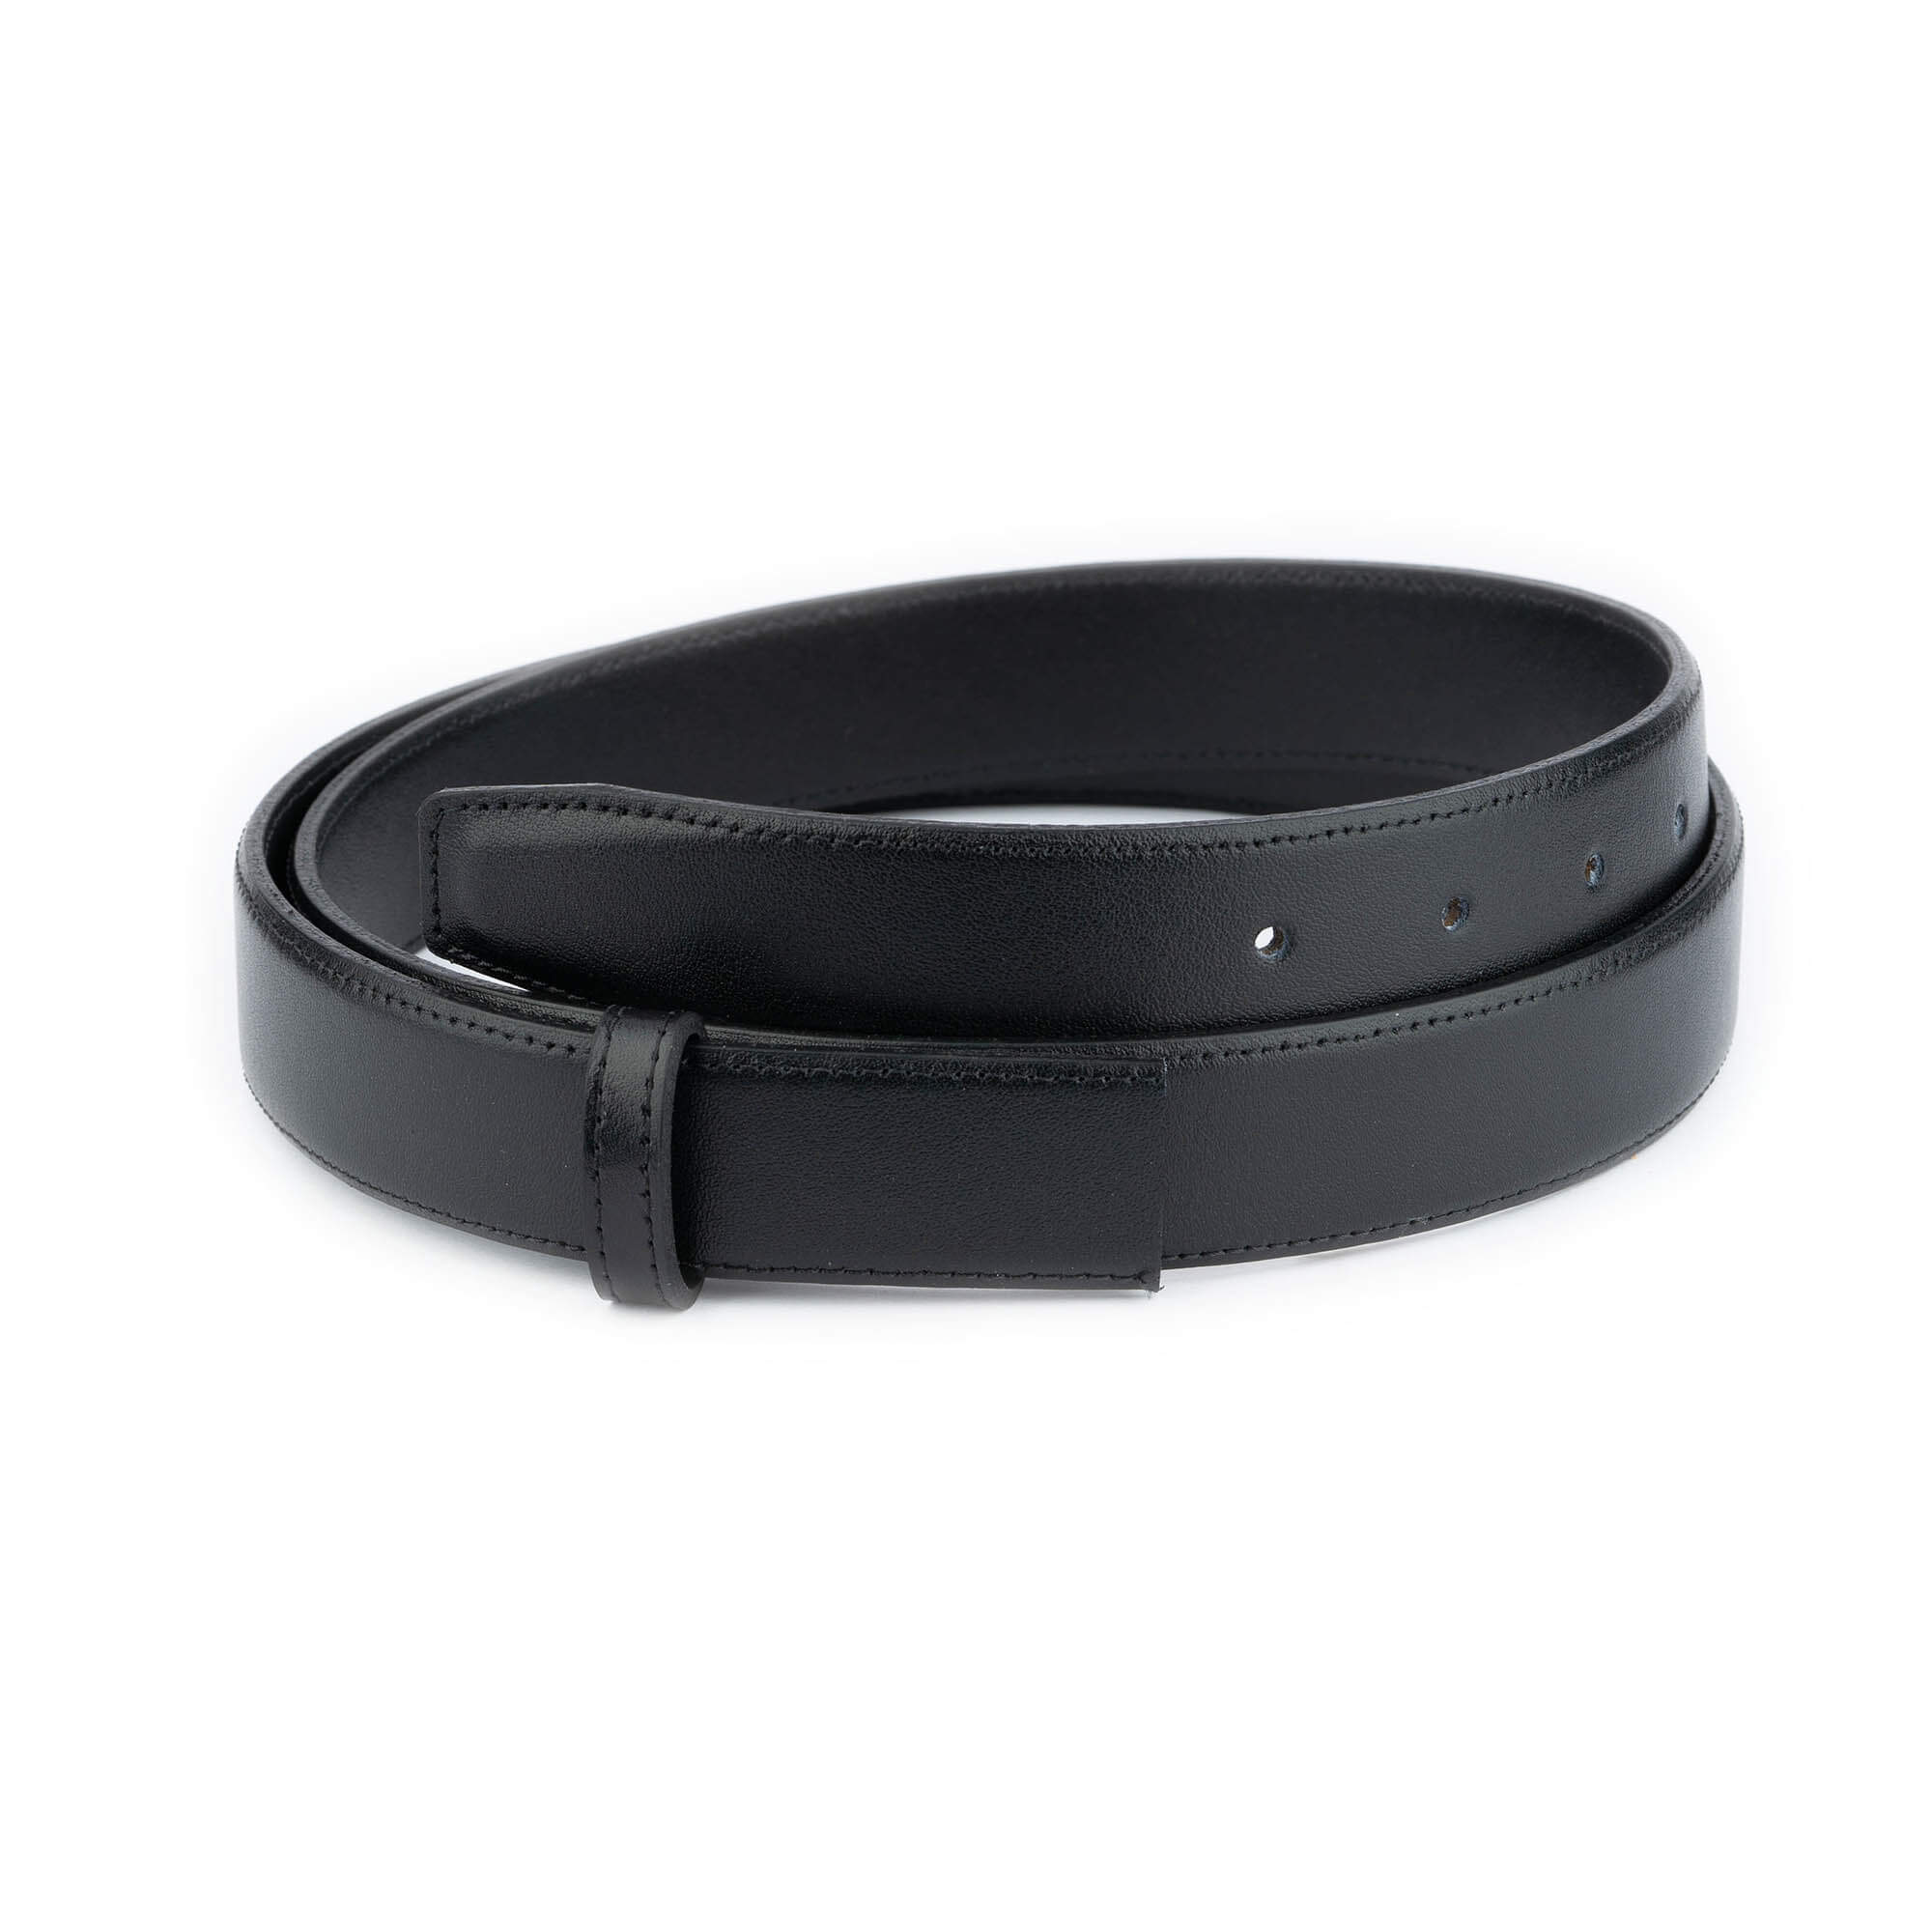 Buy Black Leather Belt Strap Replacement 3.0 Cm | Leather Belts Online